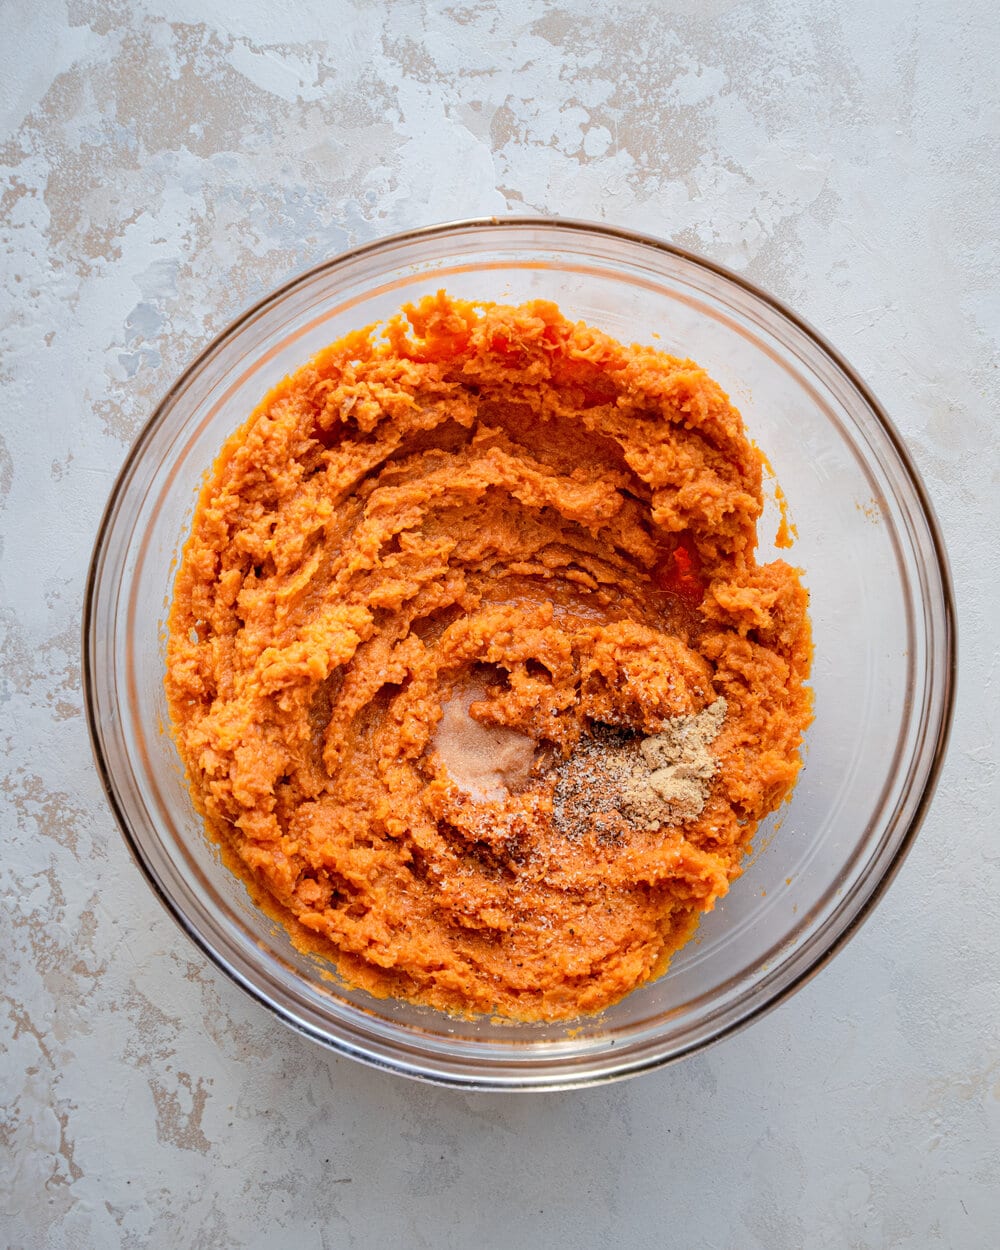 Spices on top of mashed sweet potatoes in a glass bowl.